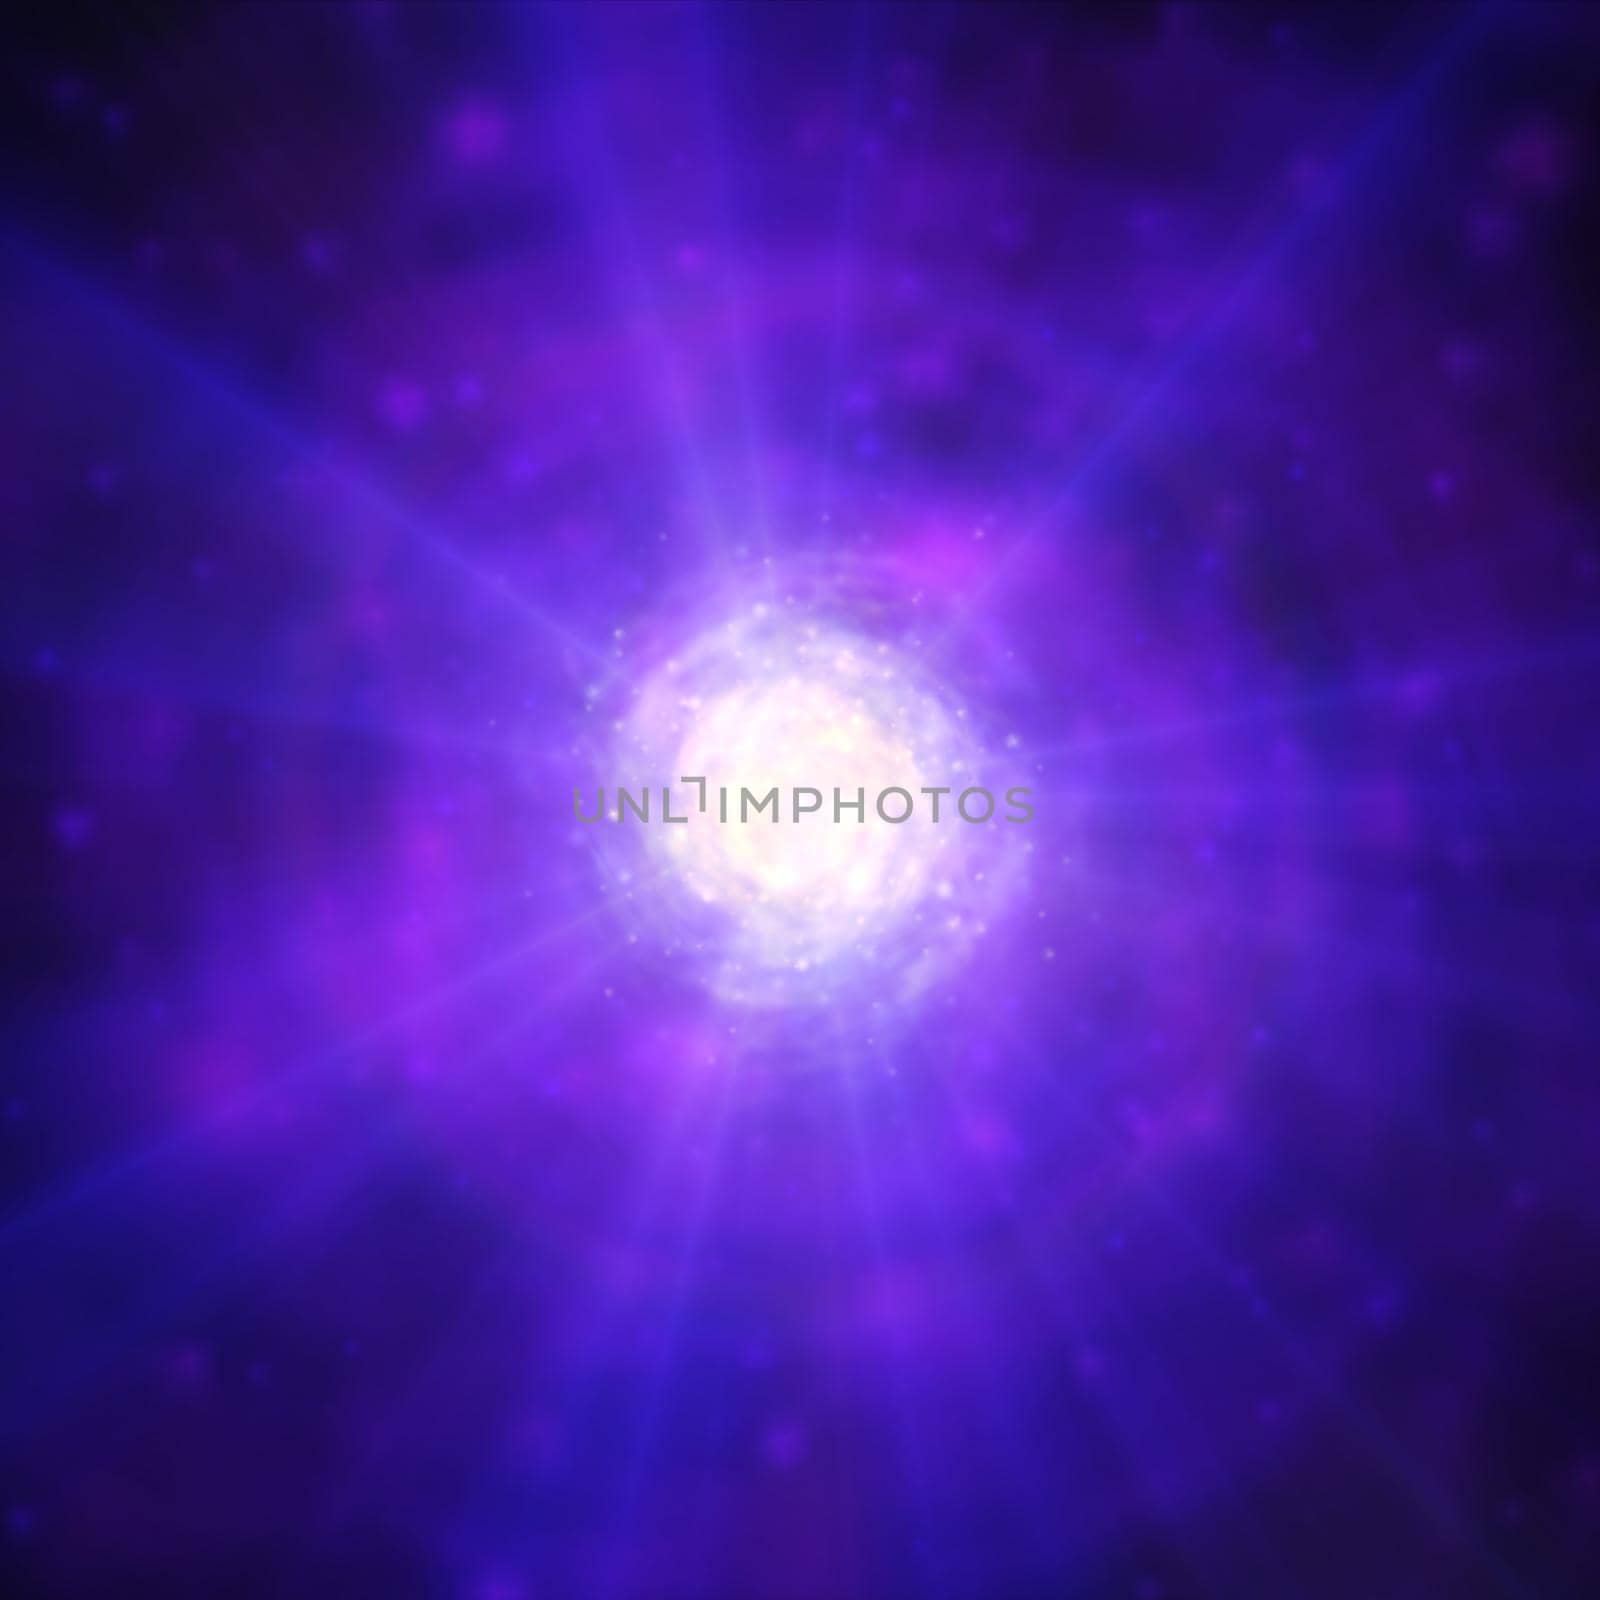 futuristic space particles in bright round energy structure illustration